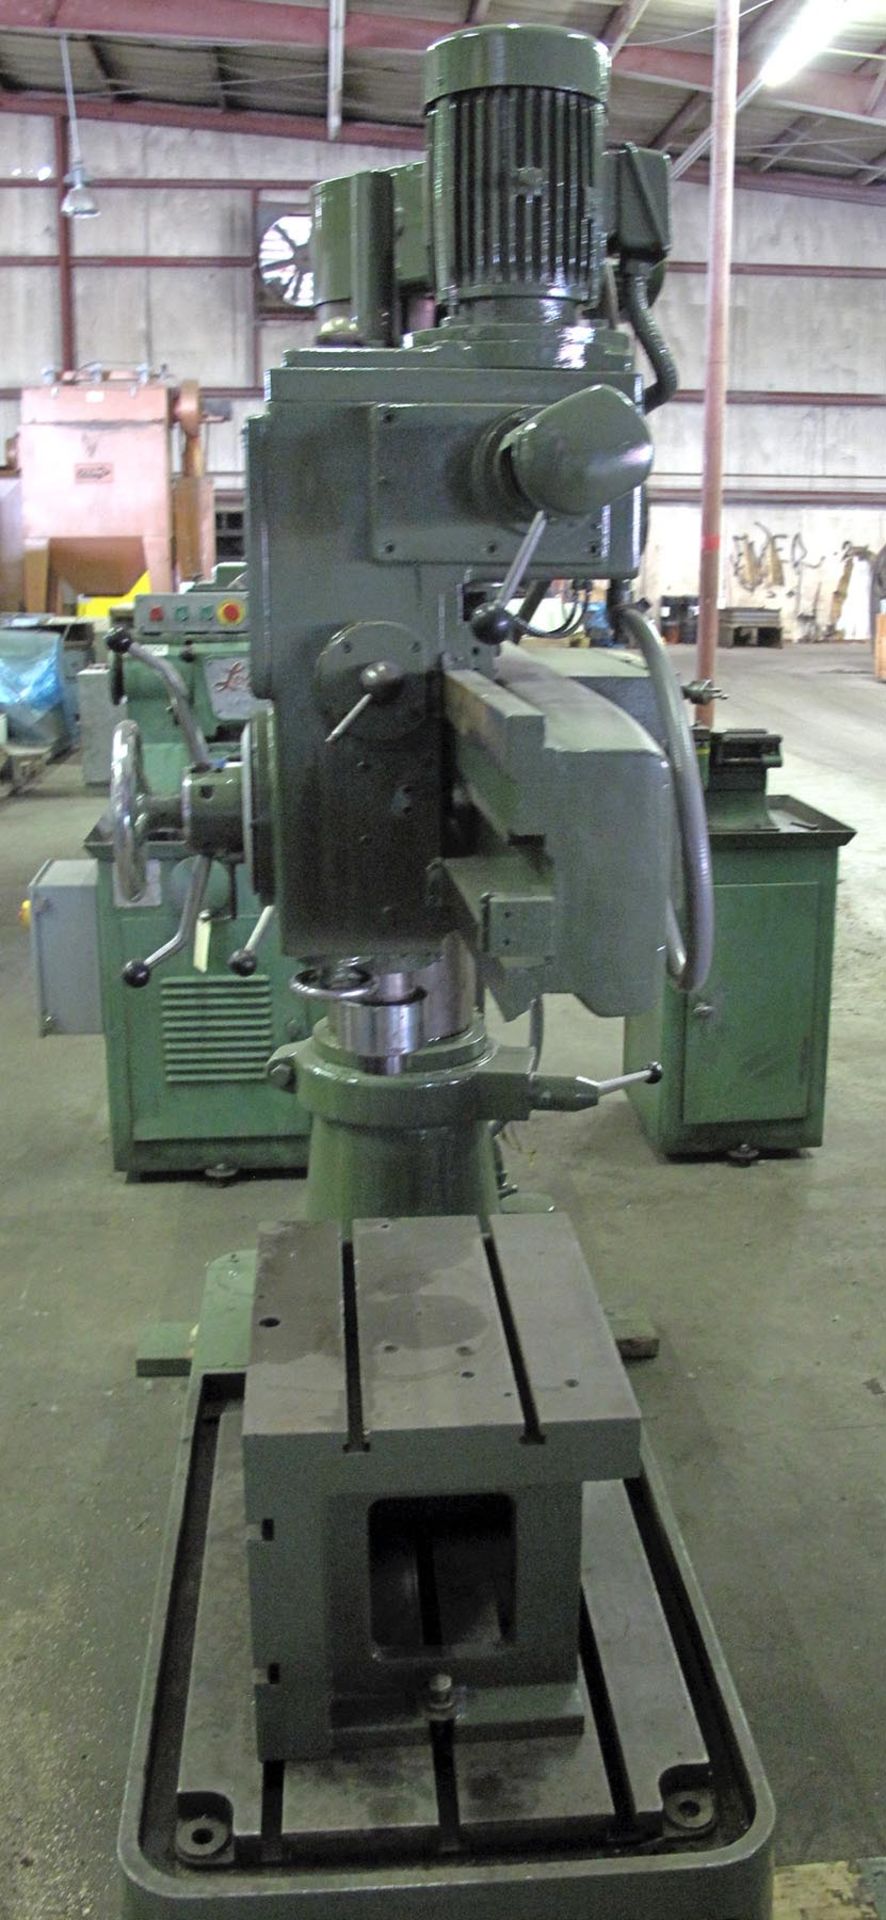 RADIAL DRILL, OOYA 3' X 9", Mdl. YMR-915, drills to center of 72"circle, 9"dia. column, 23.39"arm - Image 5 of 7